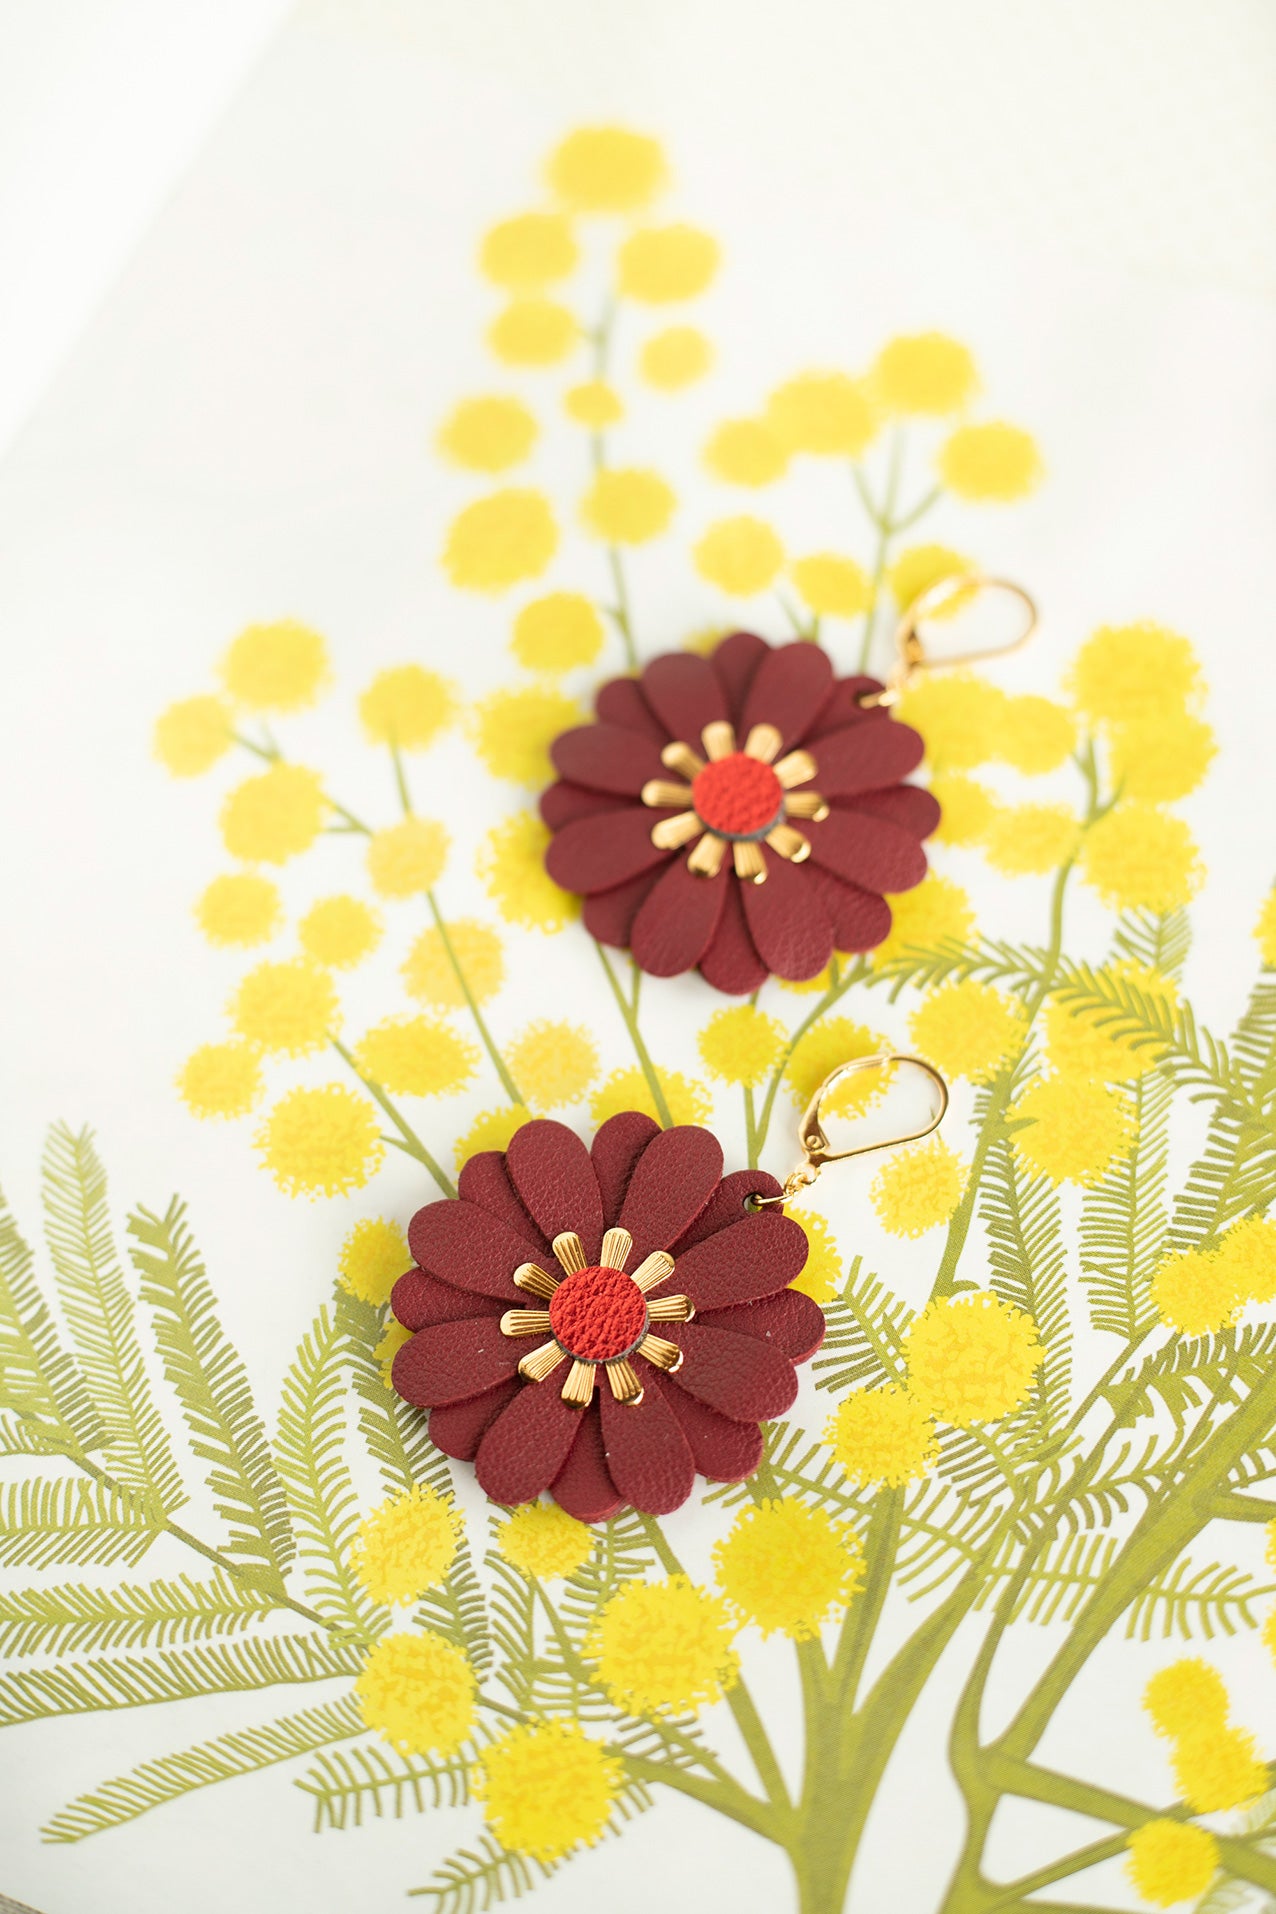 Zinnia flower earrings - Burgundy red leather and metallic red